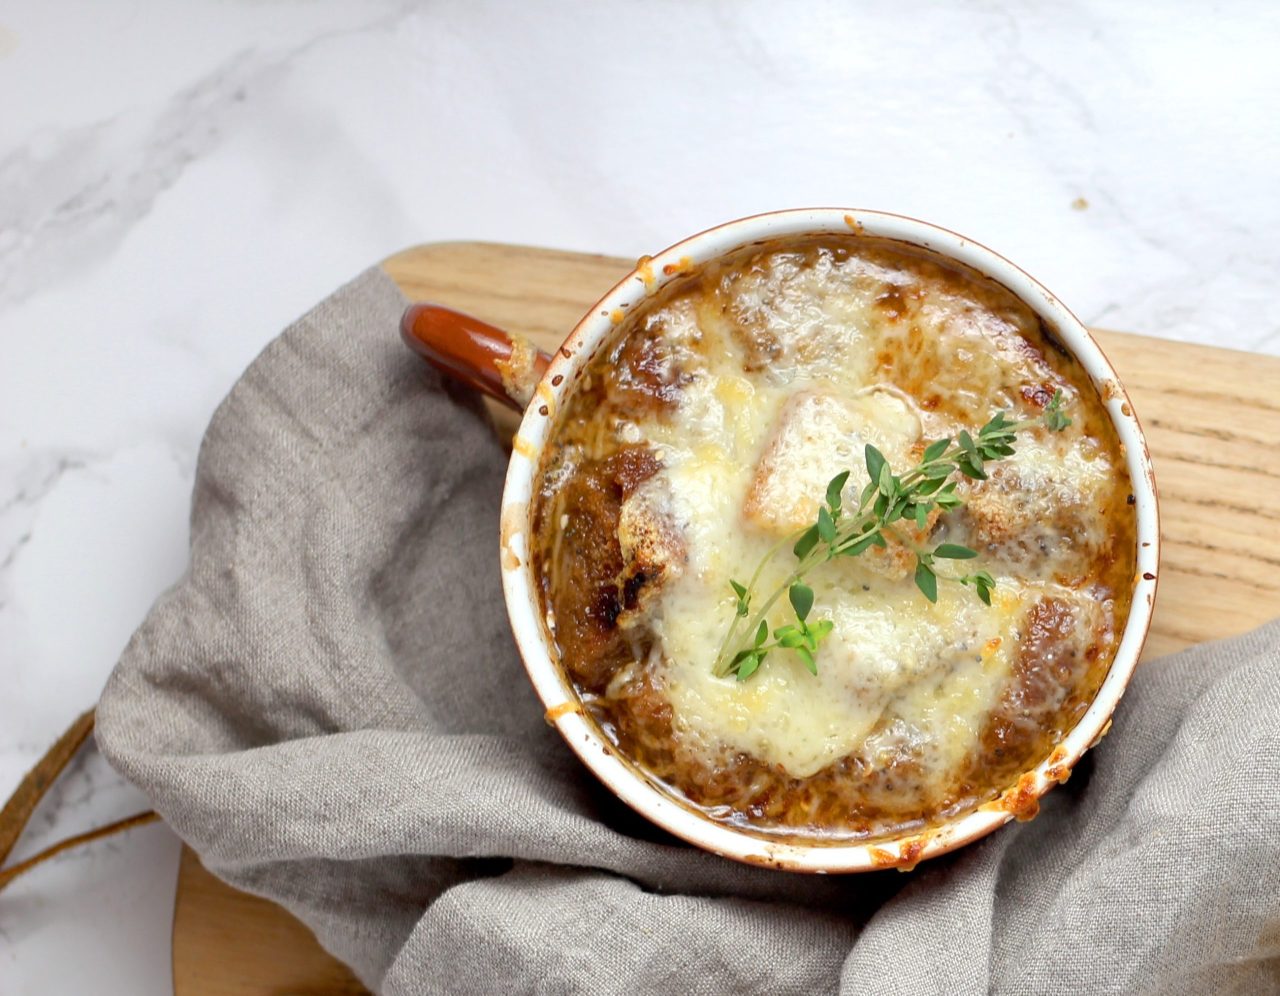 TGIFOOD: Lockdown Recipe of the Day: French Onion Soup